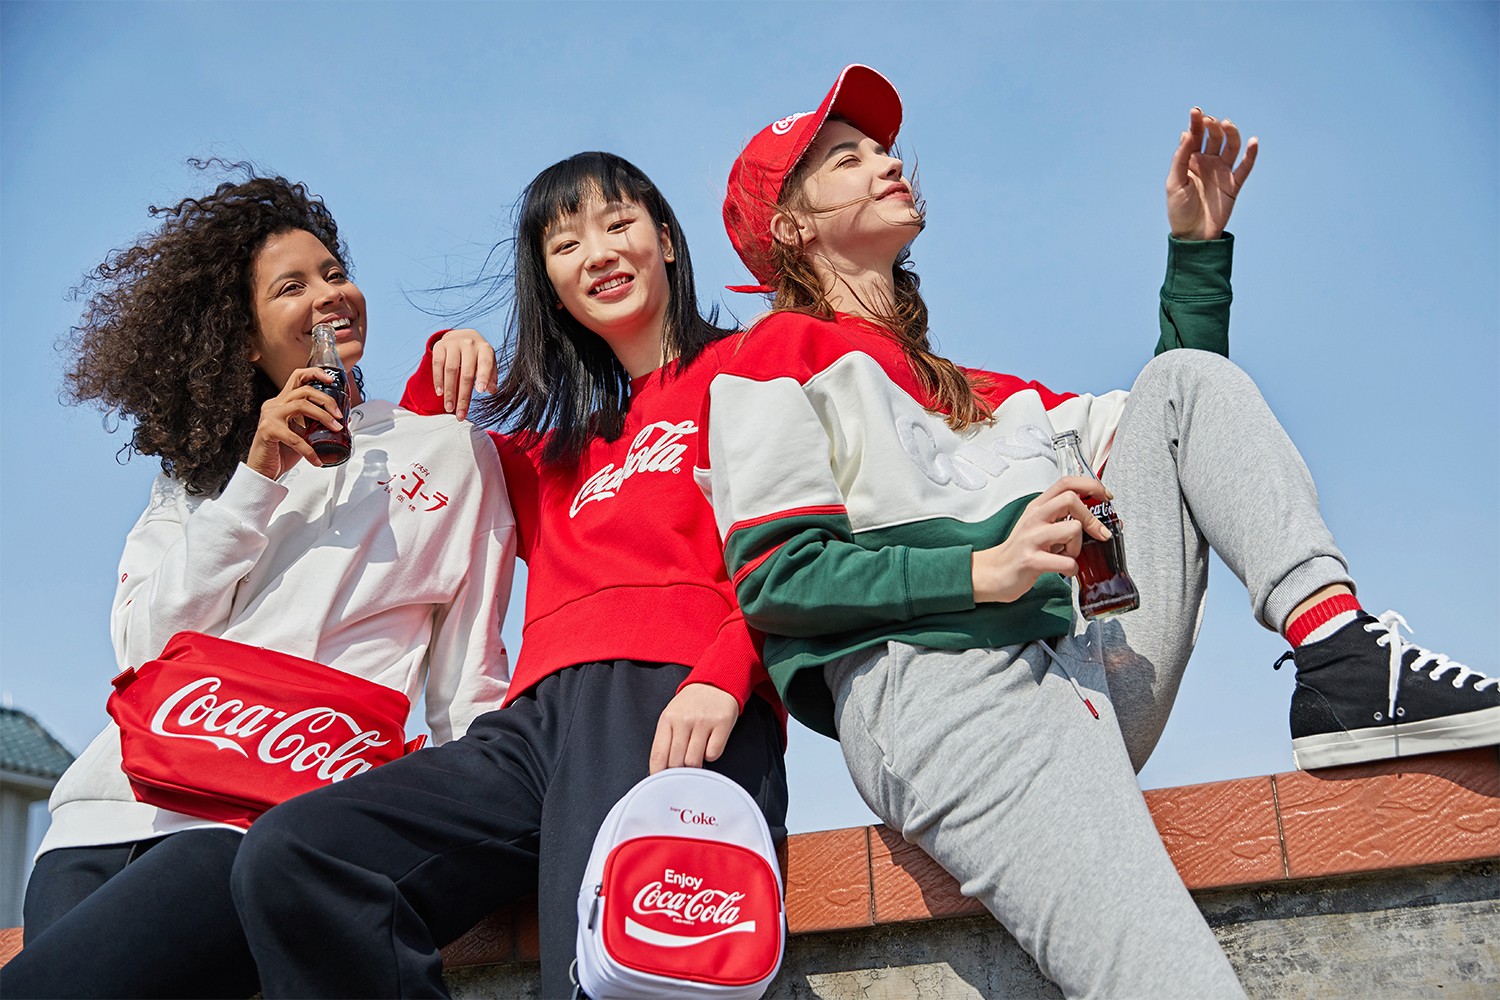 Coca-Cola has opened an online store in China, which specializes in selling clothes